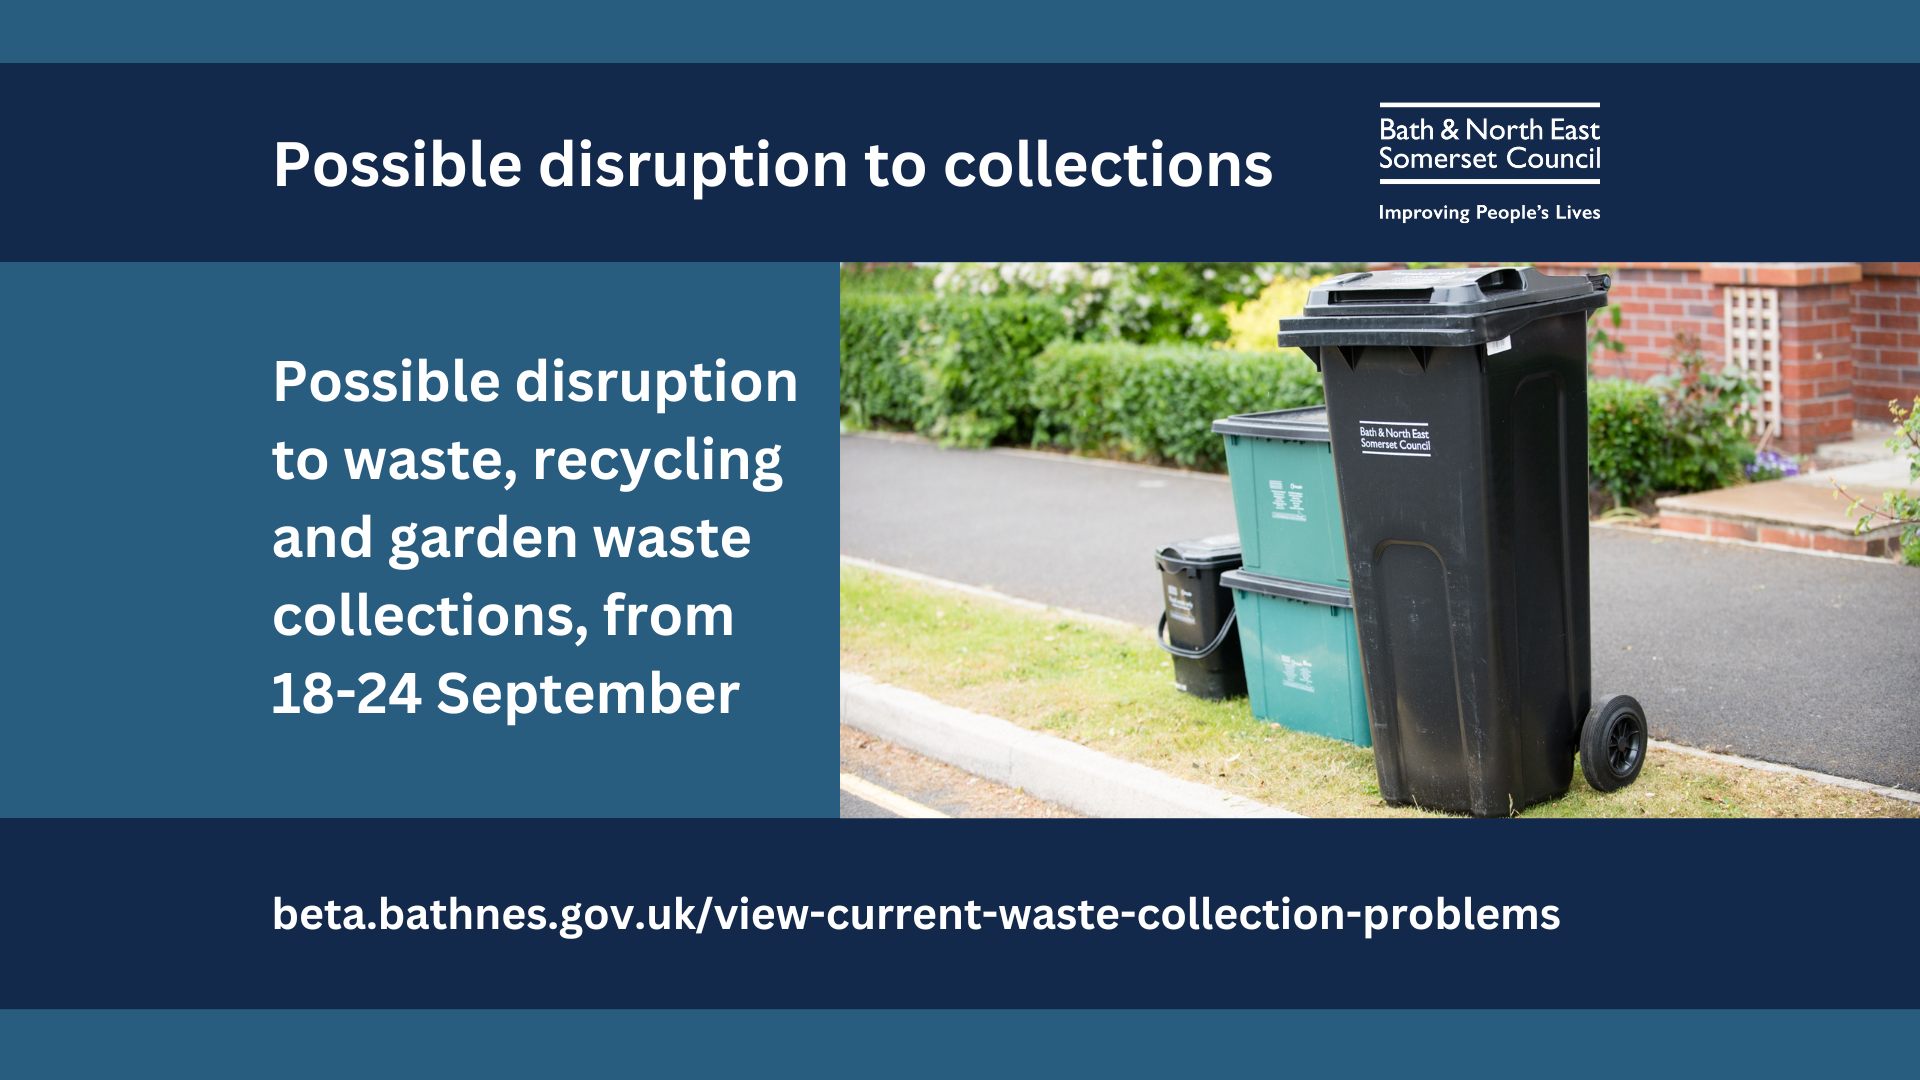 Possible disruption to waste, recycling and garden waste collections